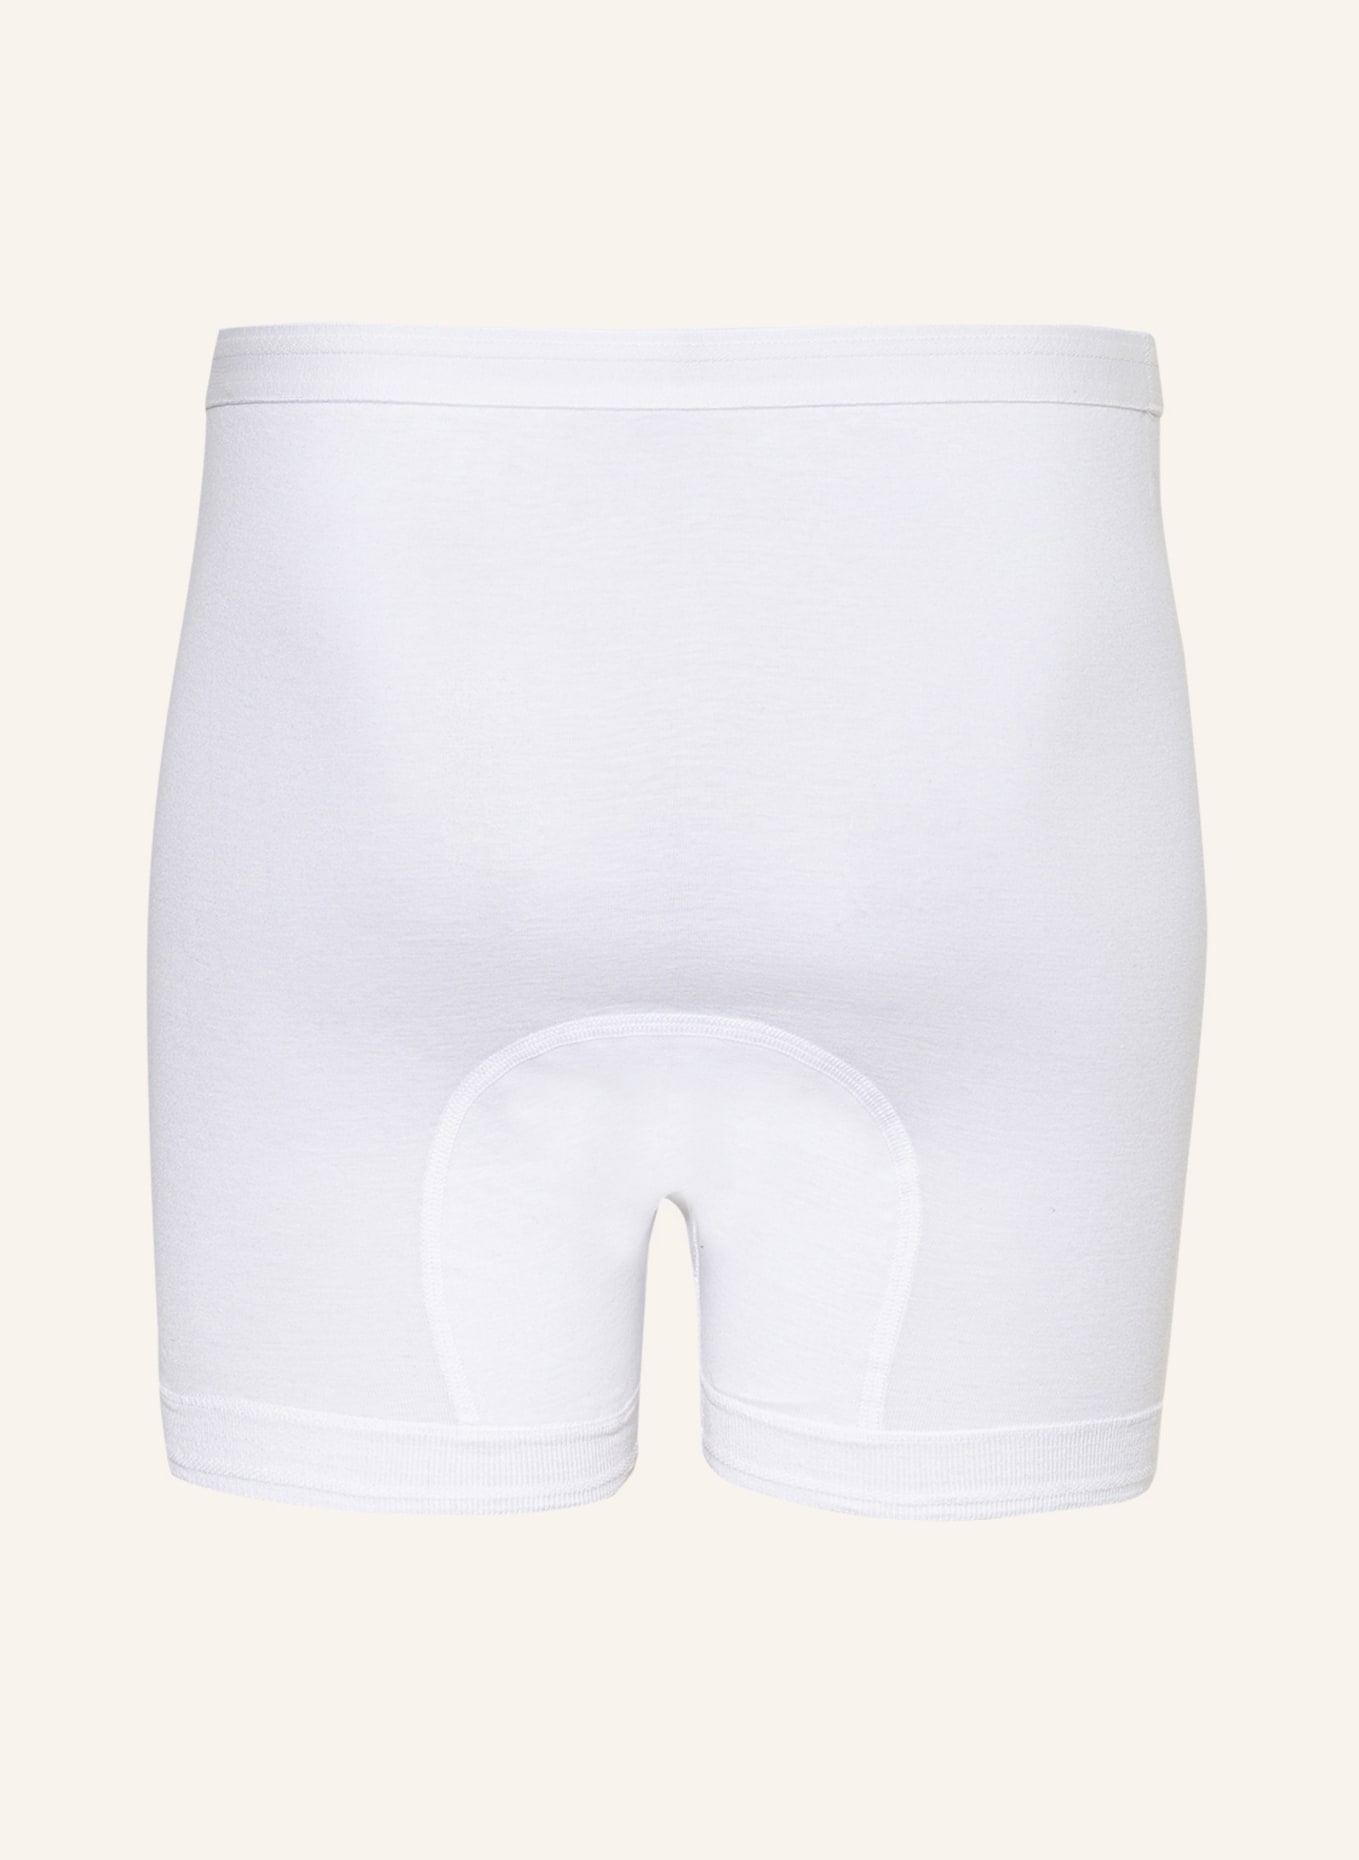 mey Boxer shorts series NOBLESSE, Color: WHITE (Image 2)